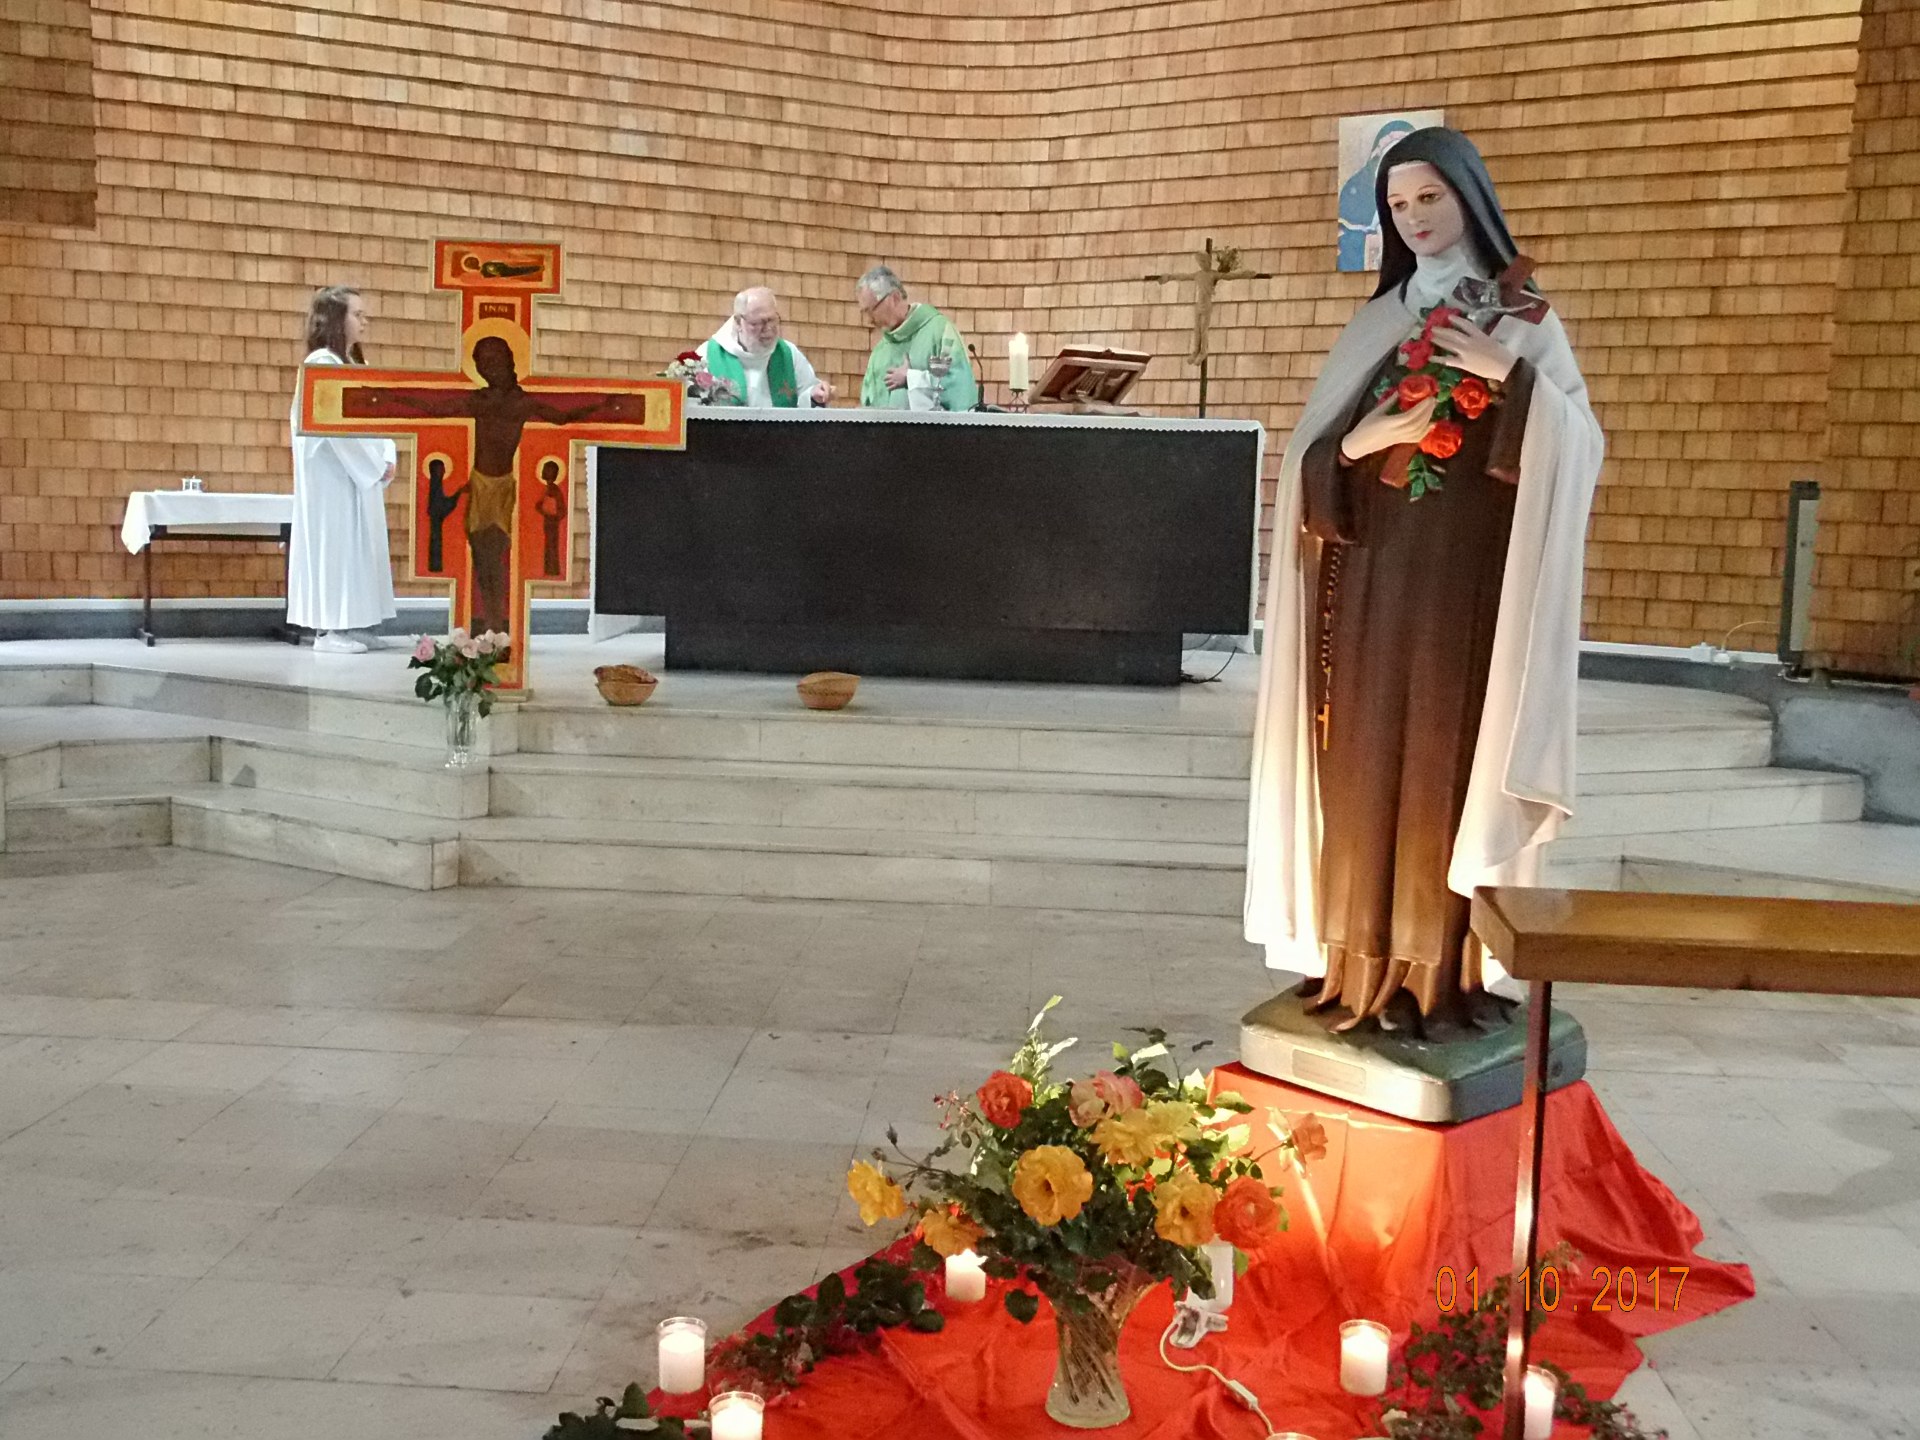 1-10-2017-Ste Therese (94)